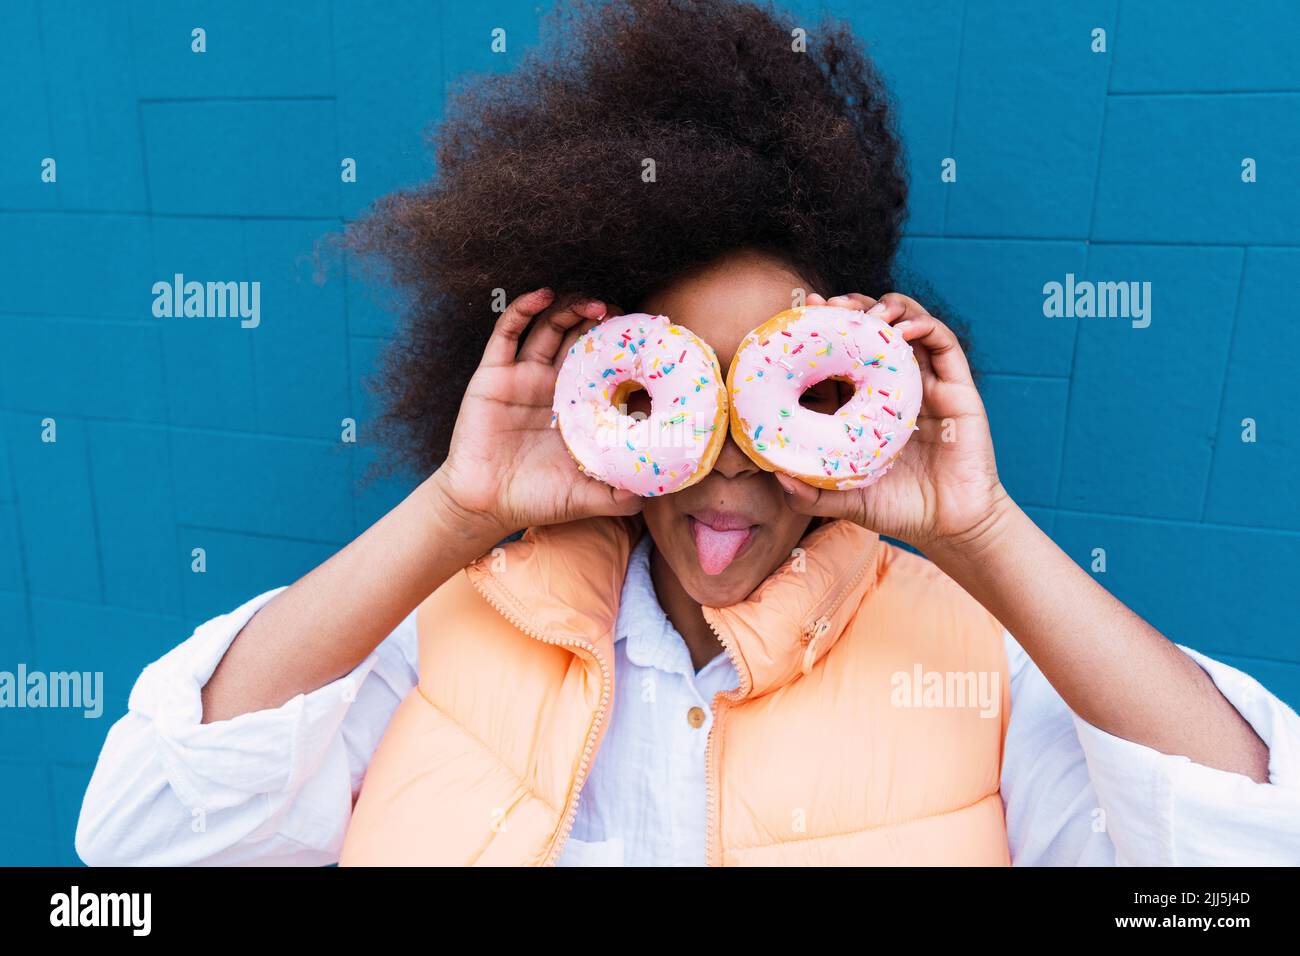 Girl sticking out tongue covering eyes with doughnuts in front of blue wall Stock Photo